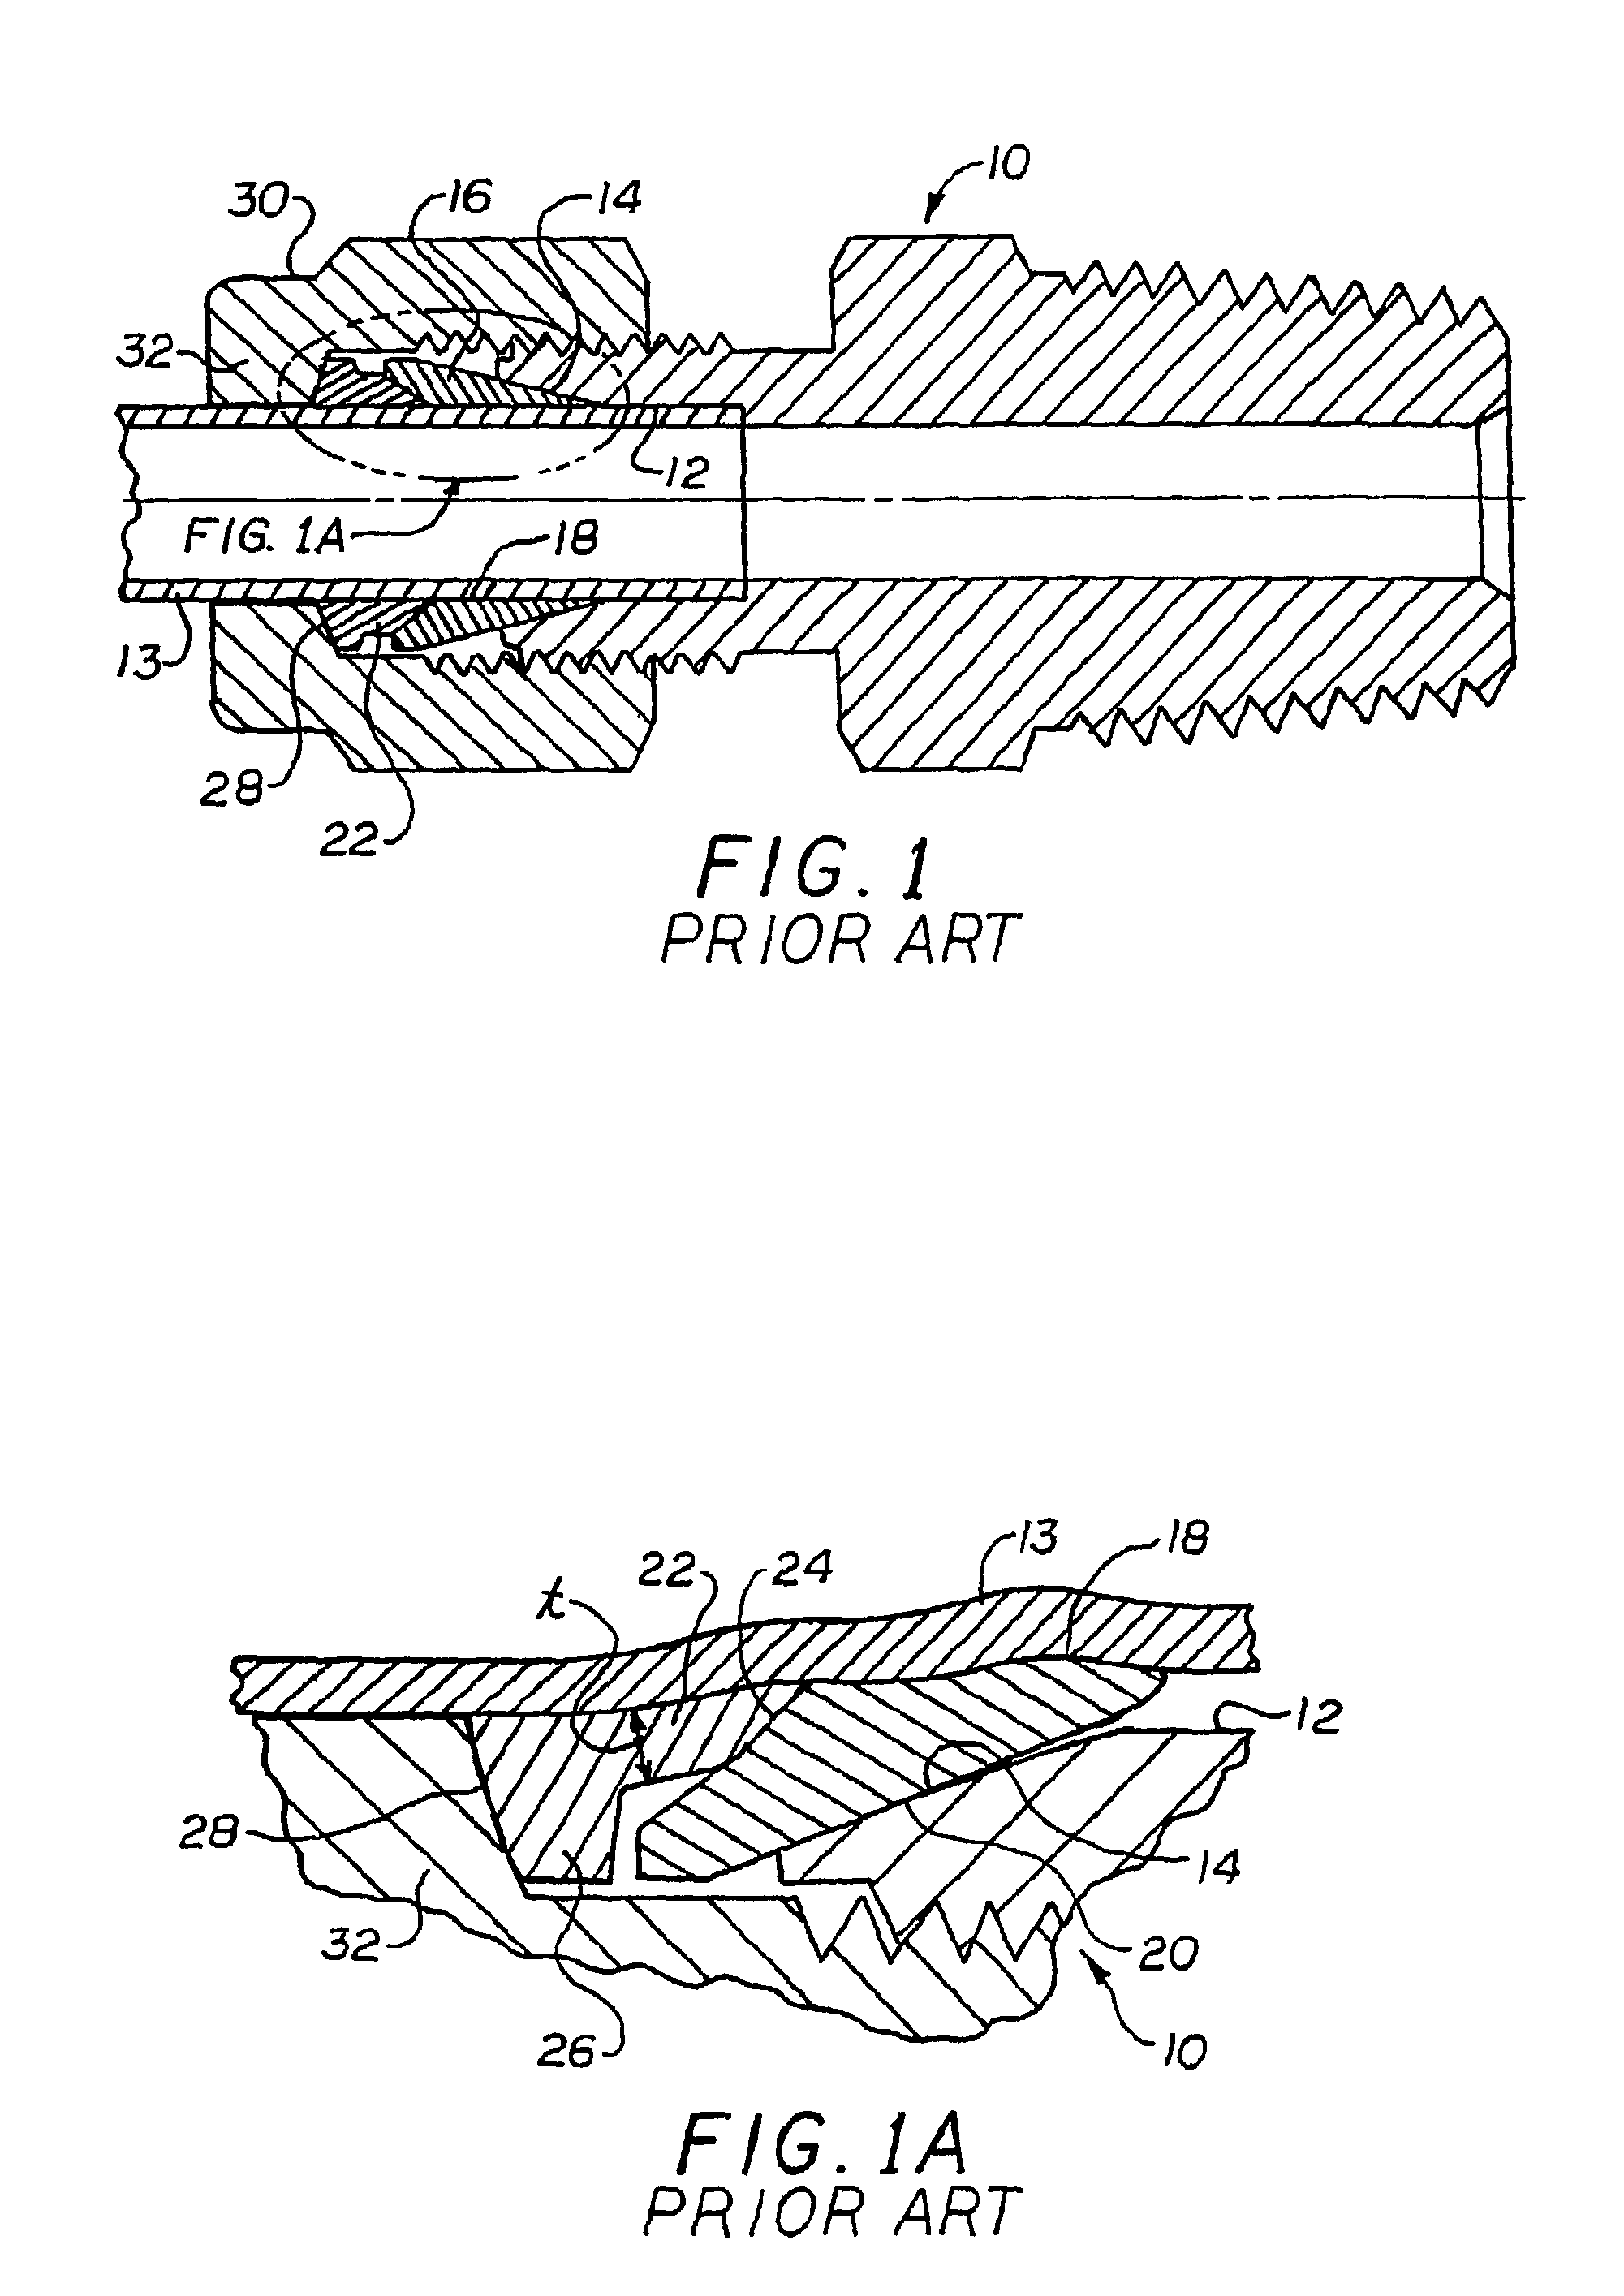 Ferrule with relief to reduce galling